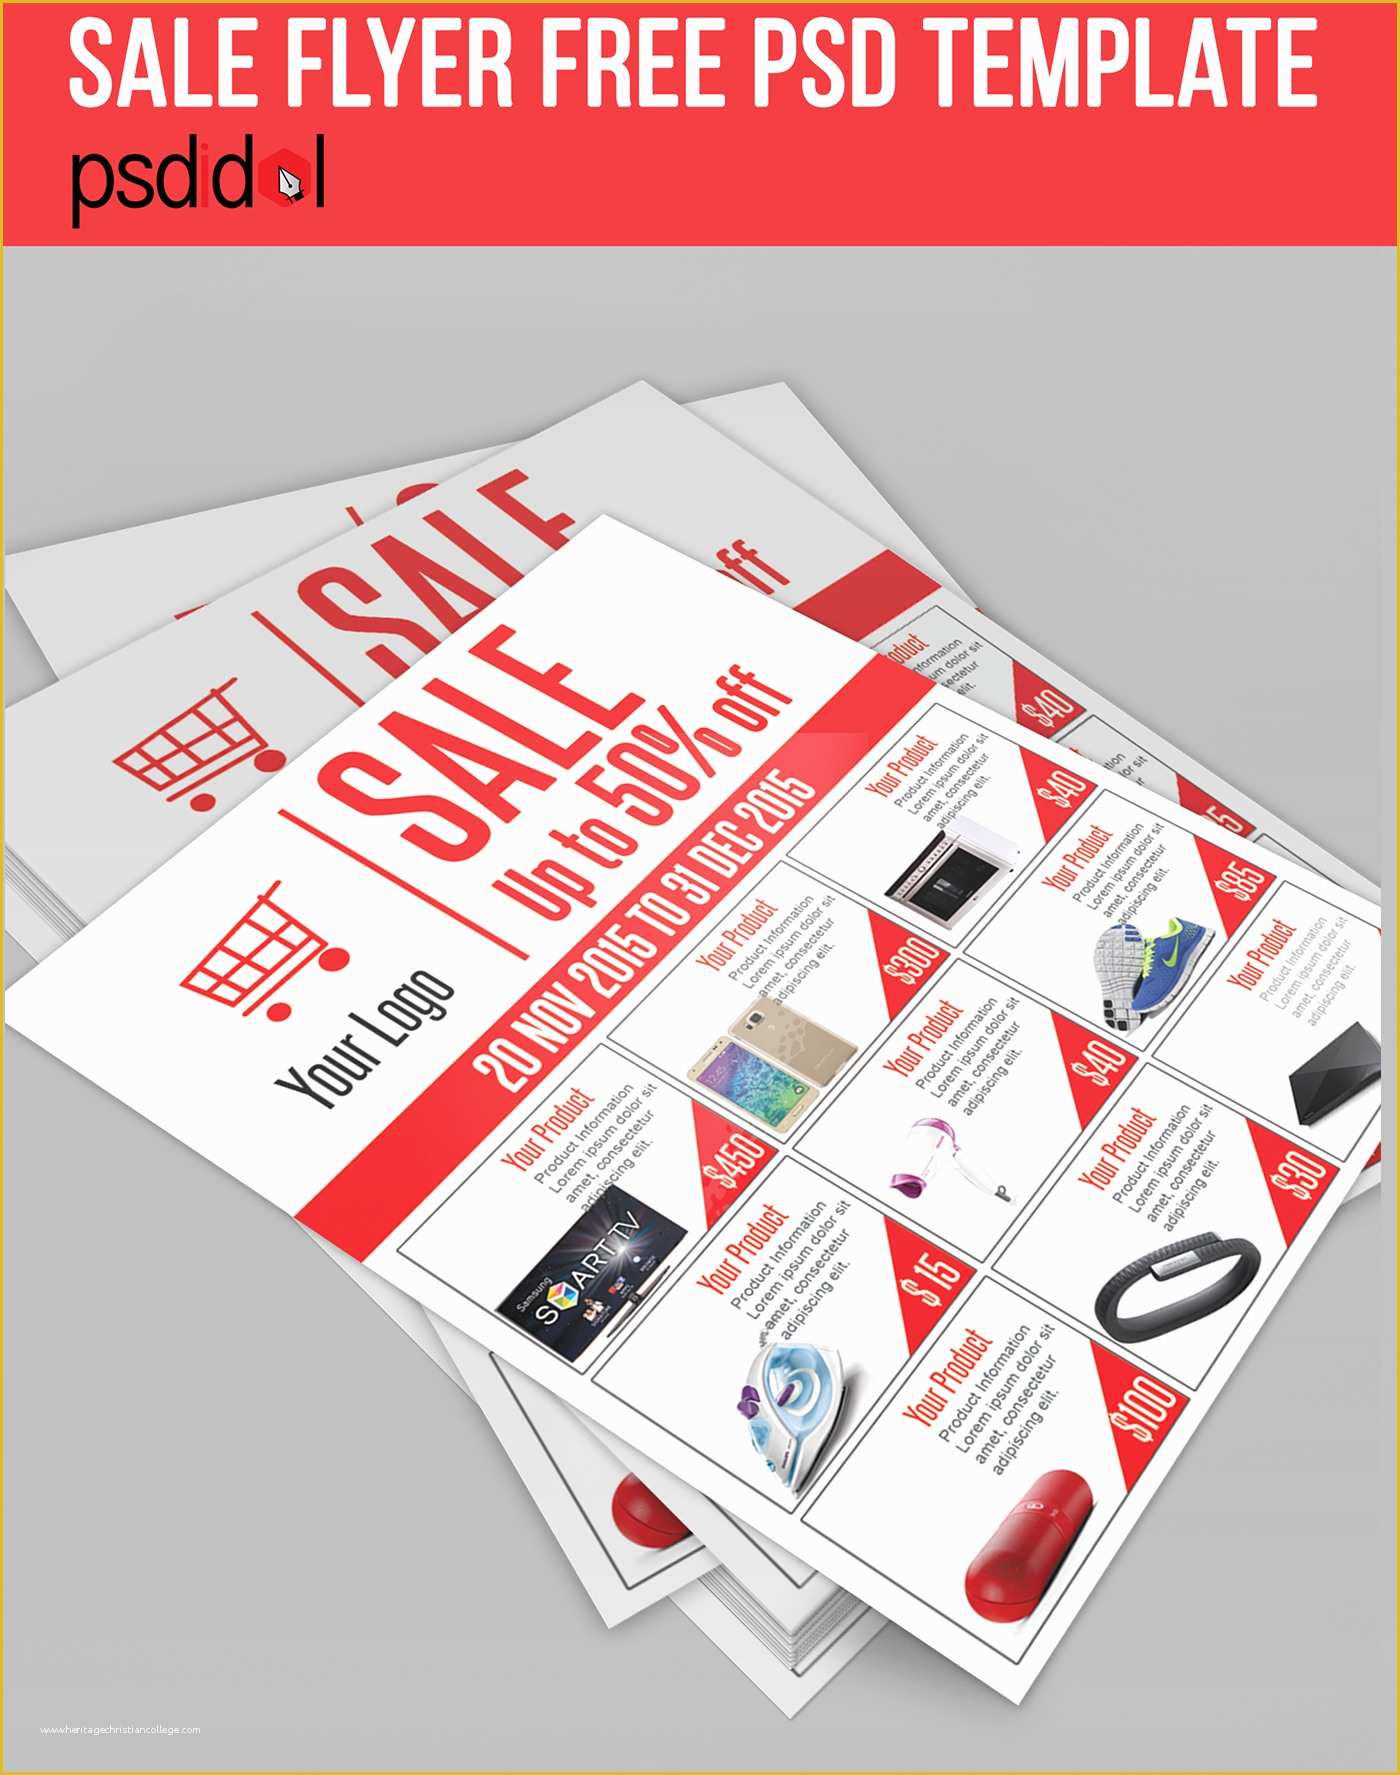 Sales Flyer Templates Free Download Of Sale Flyer Free Psd Template Download On Behance